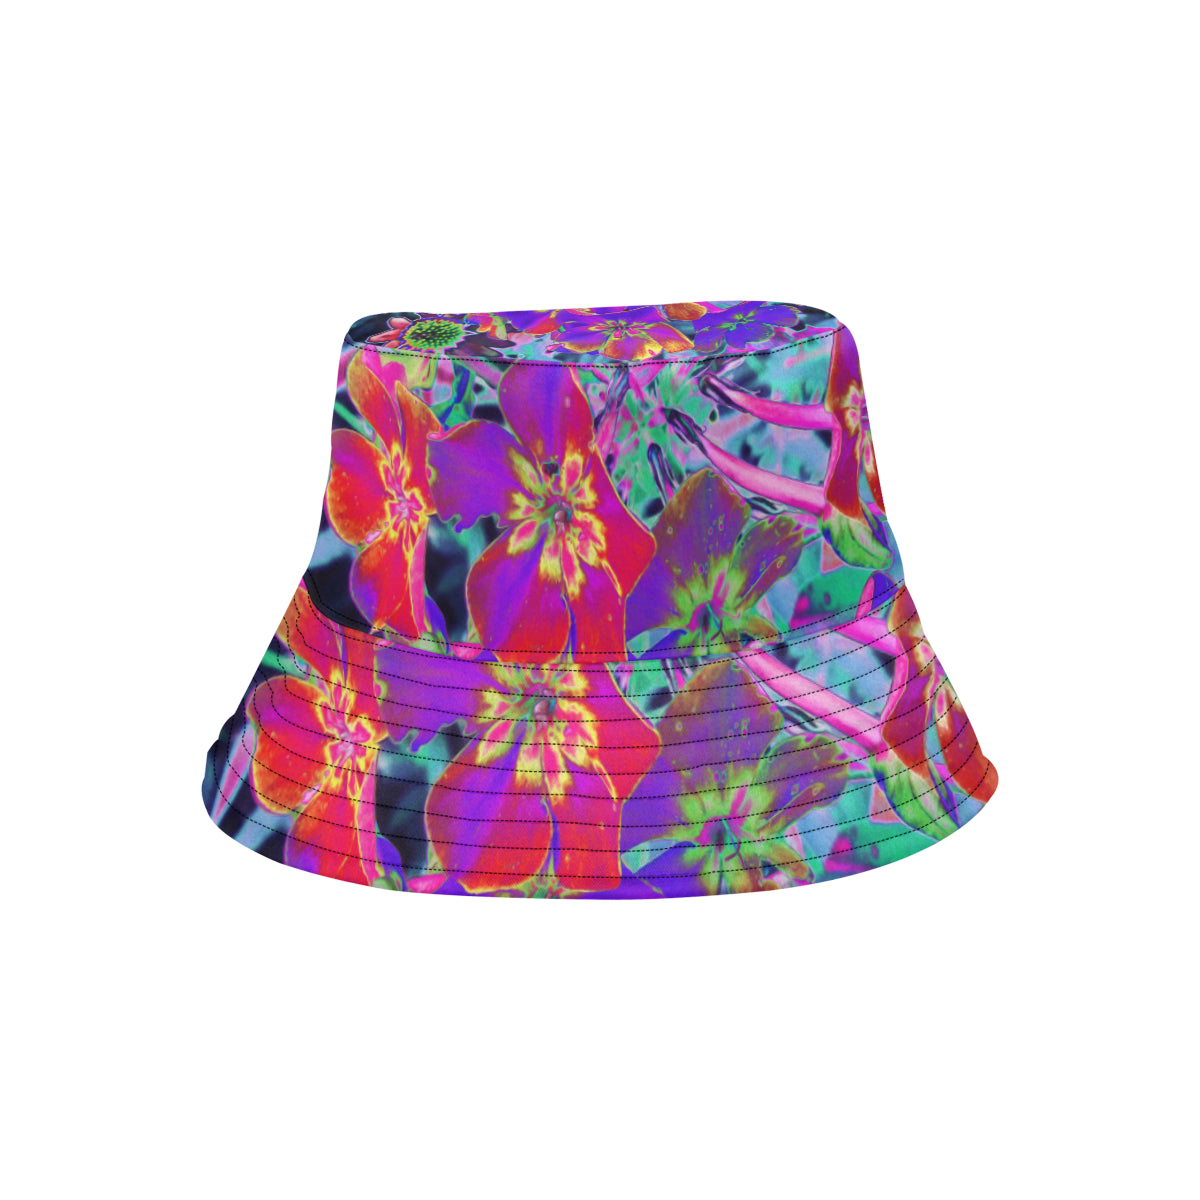 Bucket Hats, Dramatic Psychedelic Colorful Red and Purple Flowers